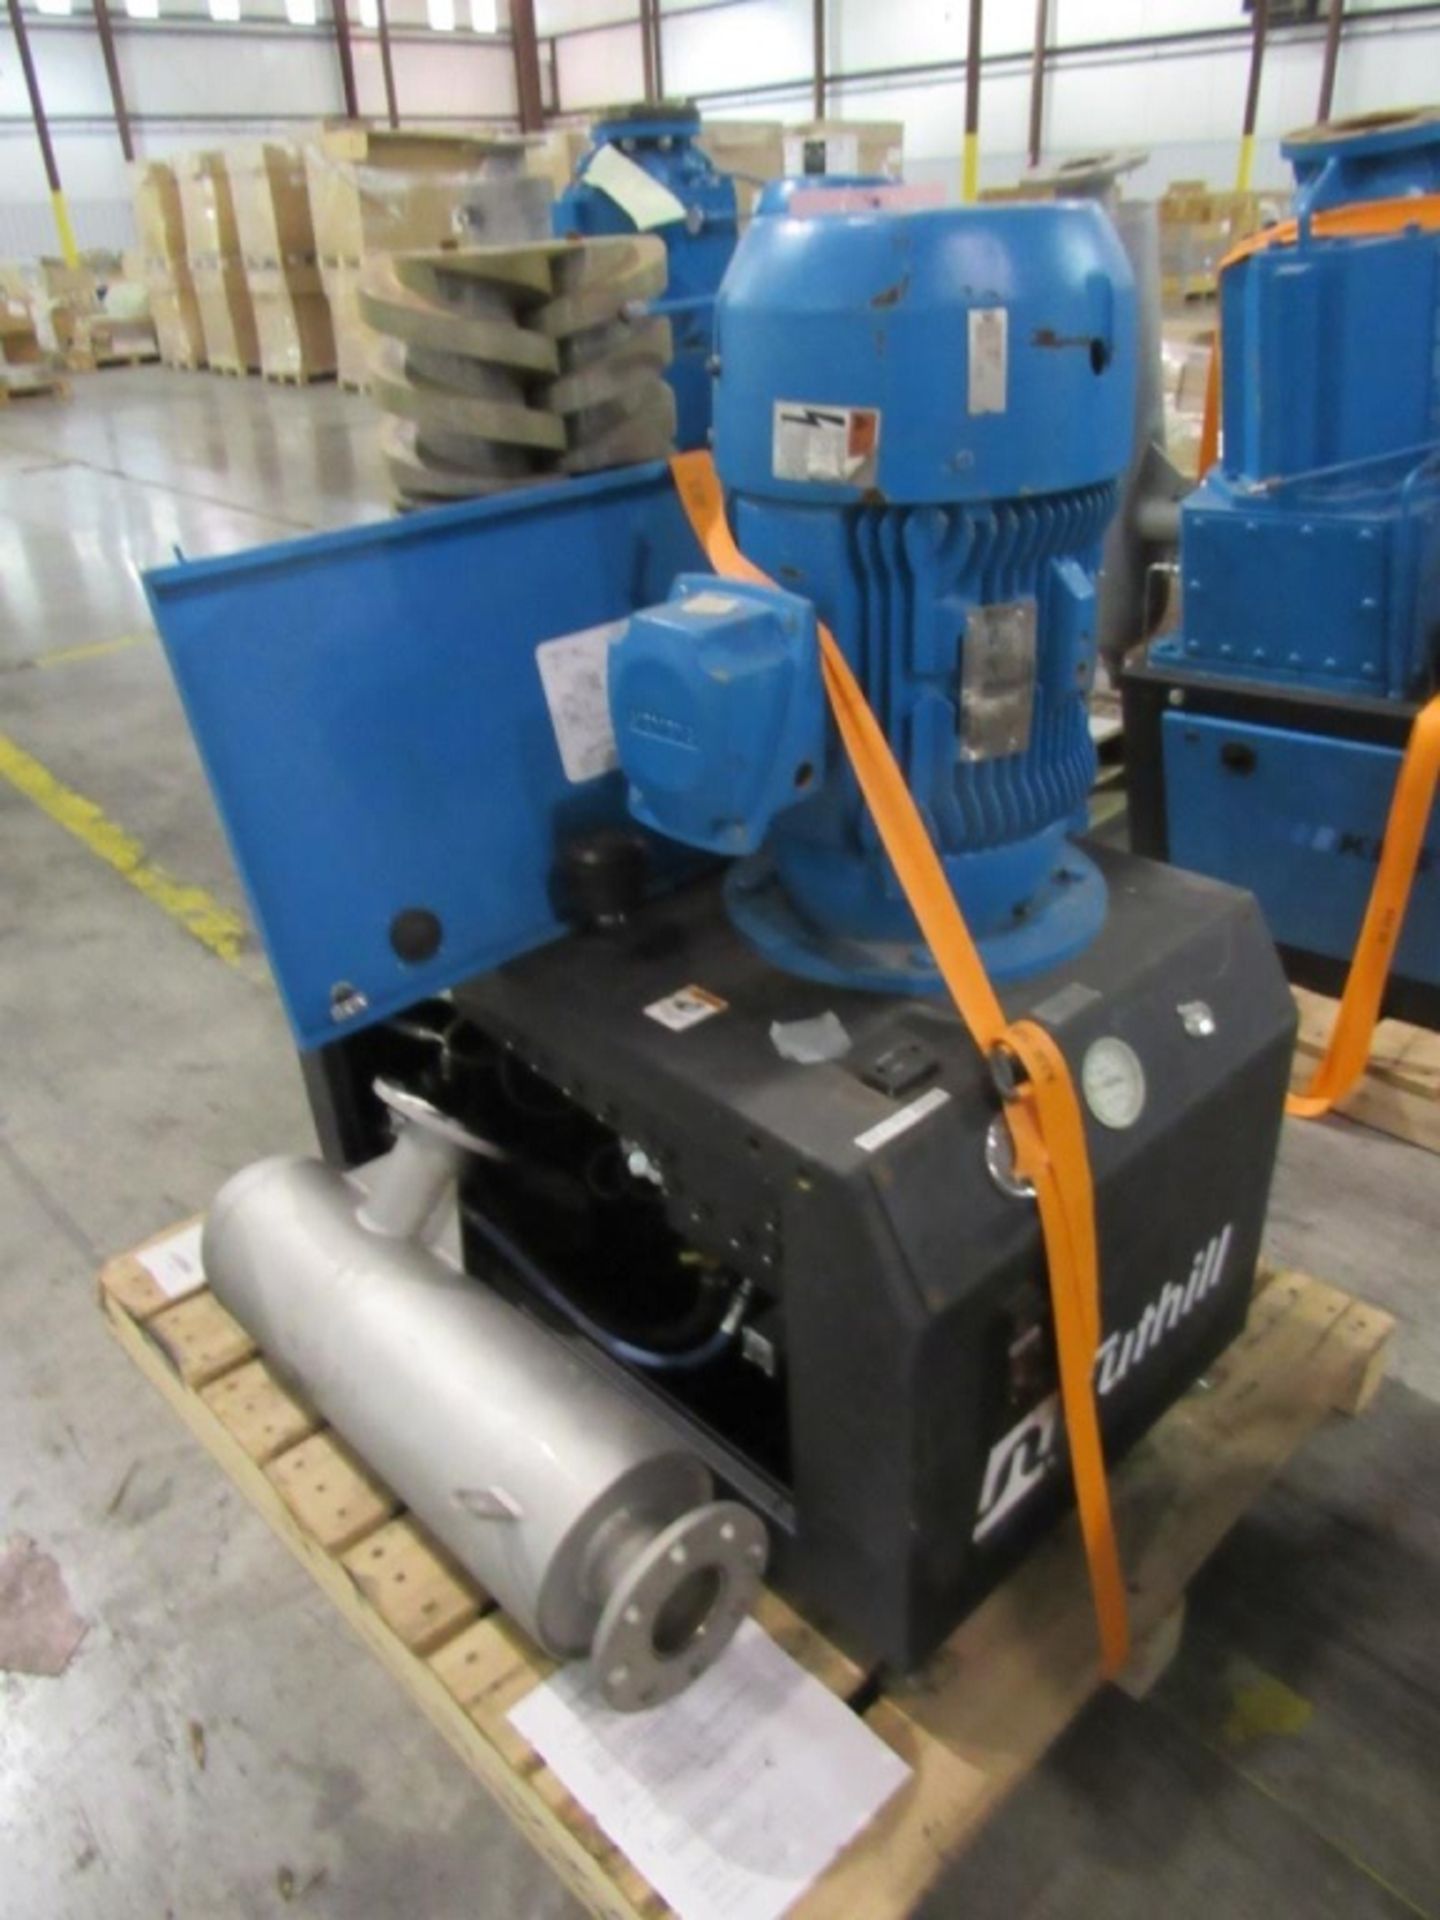 Tuthill KDS 425 Screw Vacuum Pump- ***Located in Cleveland, TN*** MFR - Tuthill Model - KDS 425 - Image 2 of 9